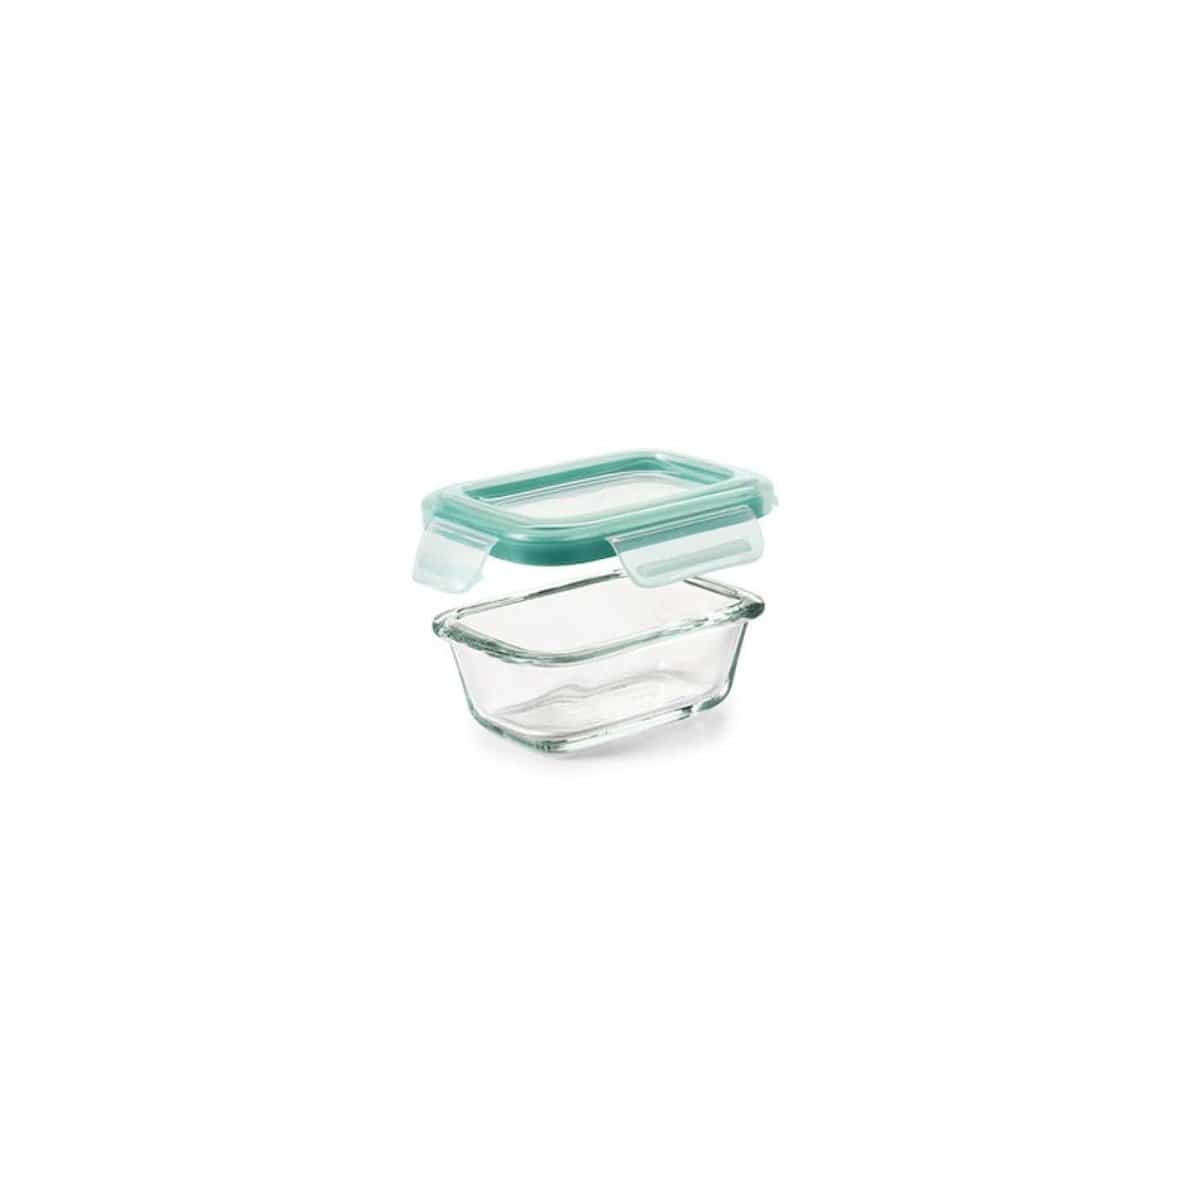 OXO Good Grips SNAP Glass Rectangle Container 3.5 Cup - Kitchen